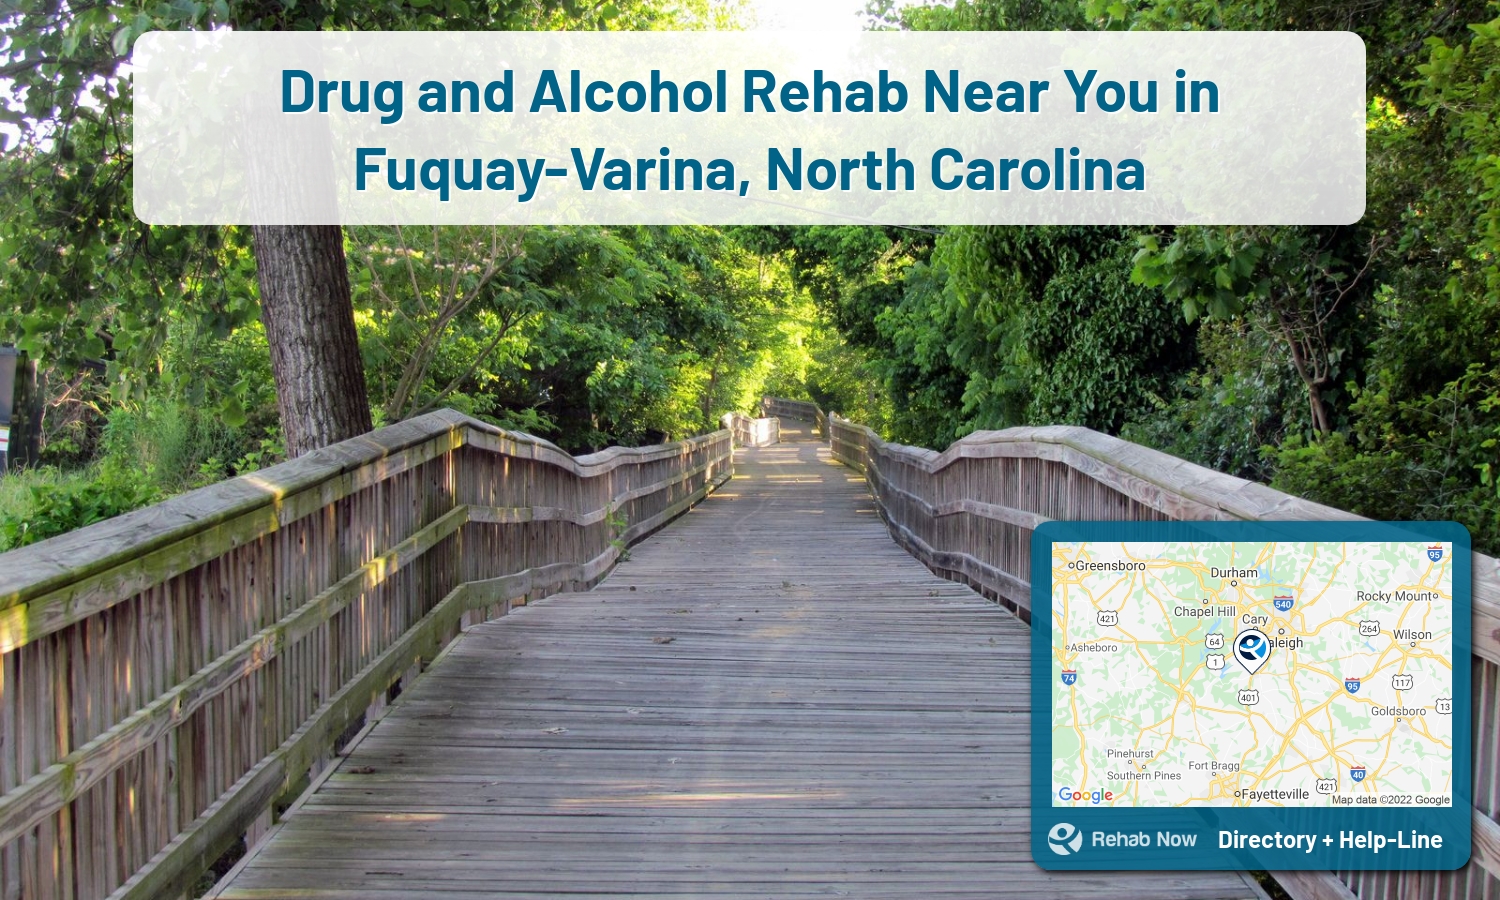 Fuquay-Varina, NC Treatment Centers. Find drug rehab in Fuquay-Varina, North Carolina, or detox and treatment programs. Get the right help now!